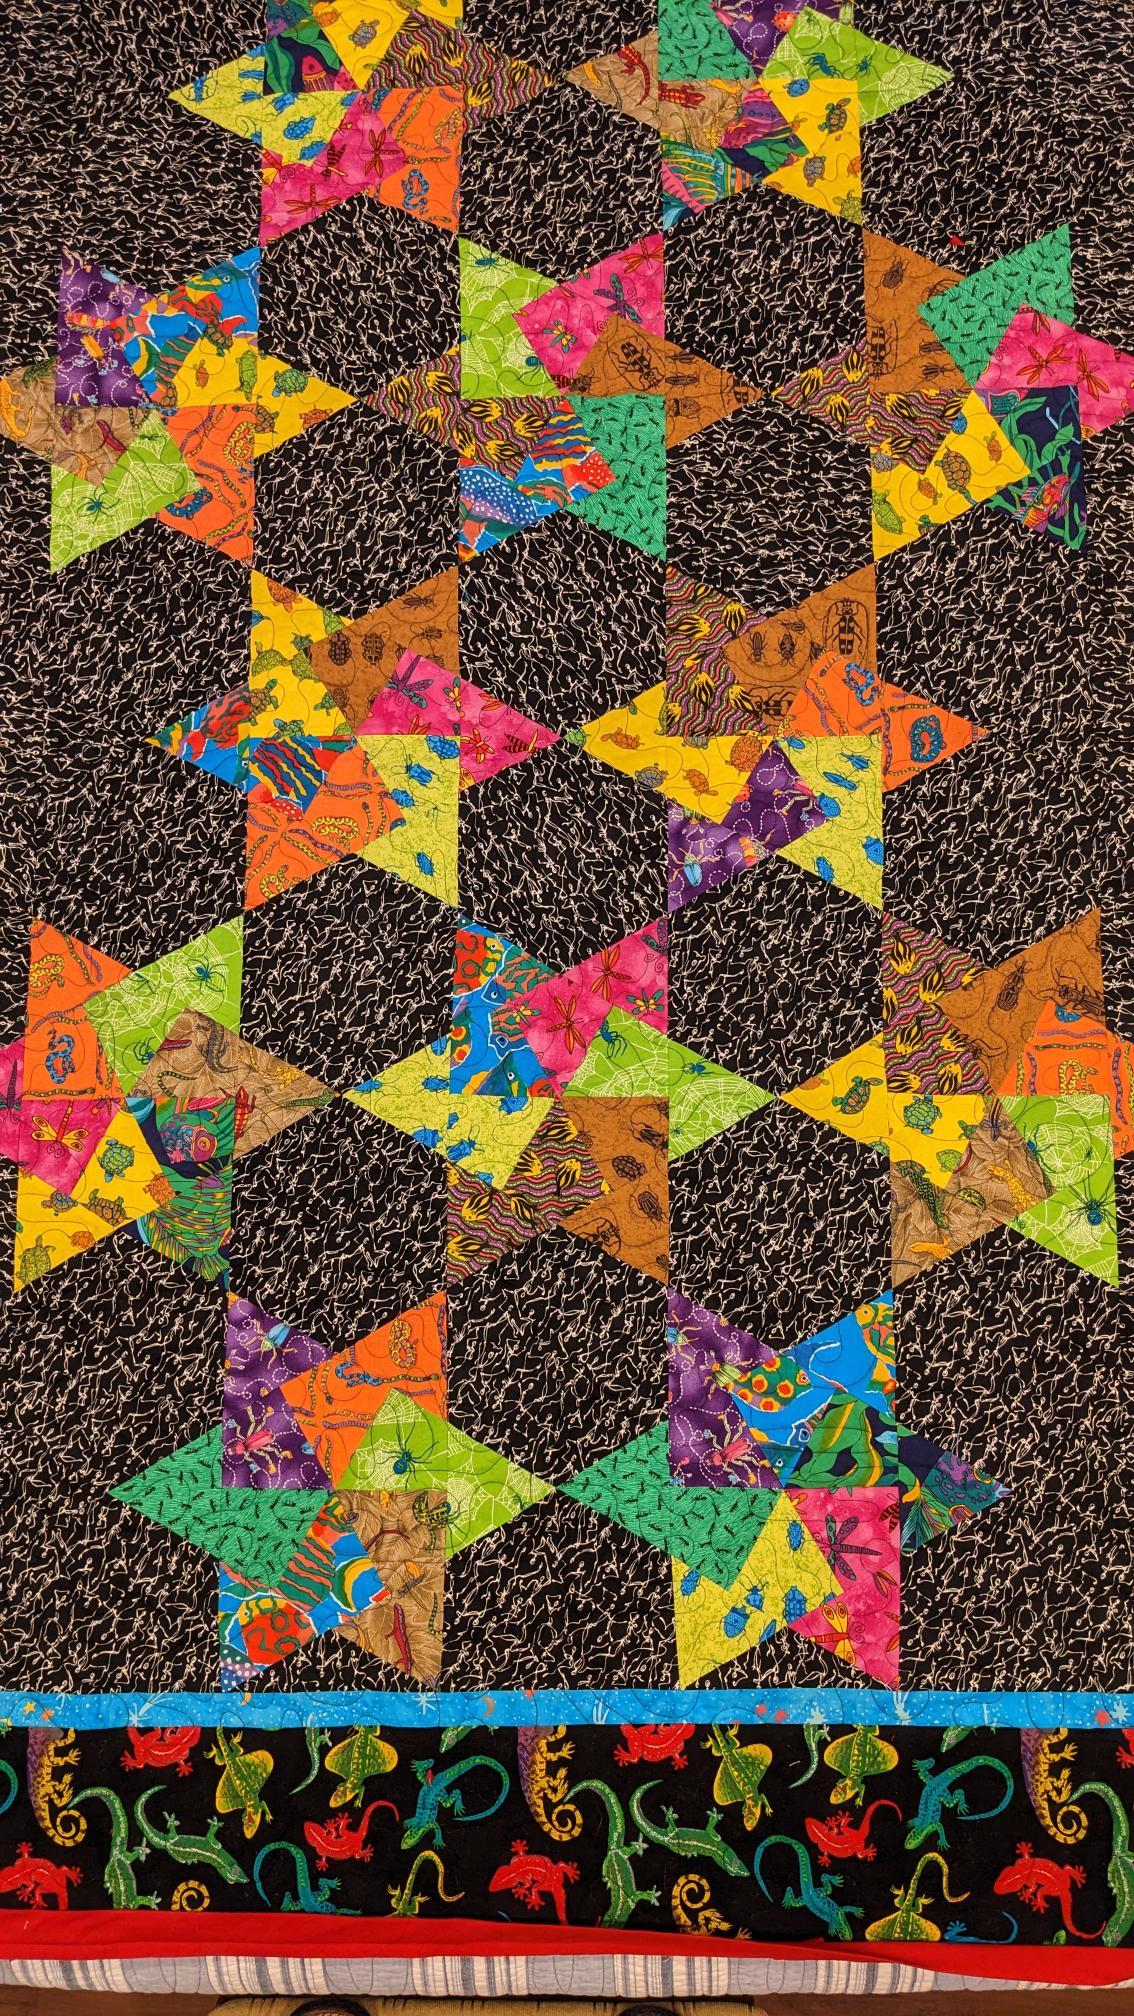 Bugs quilt